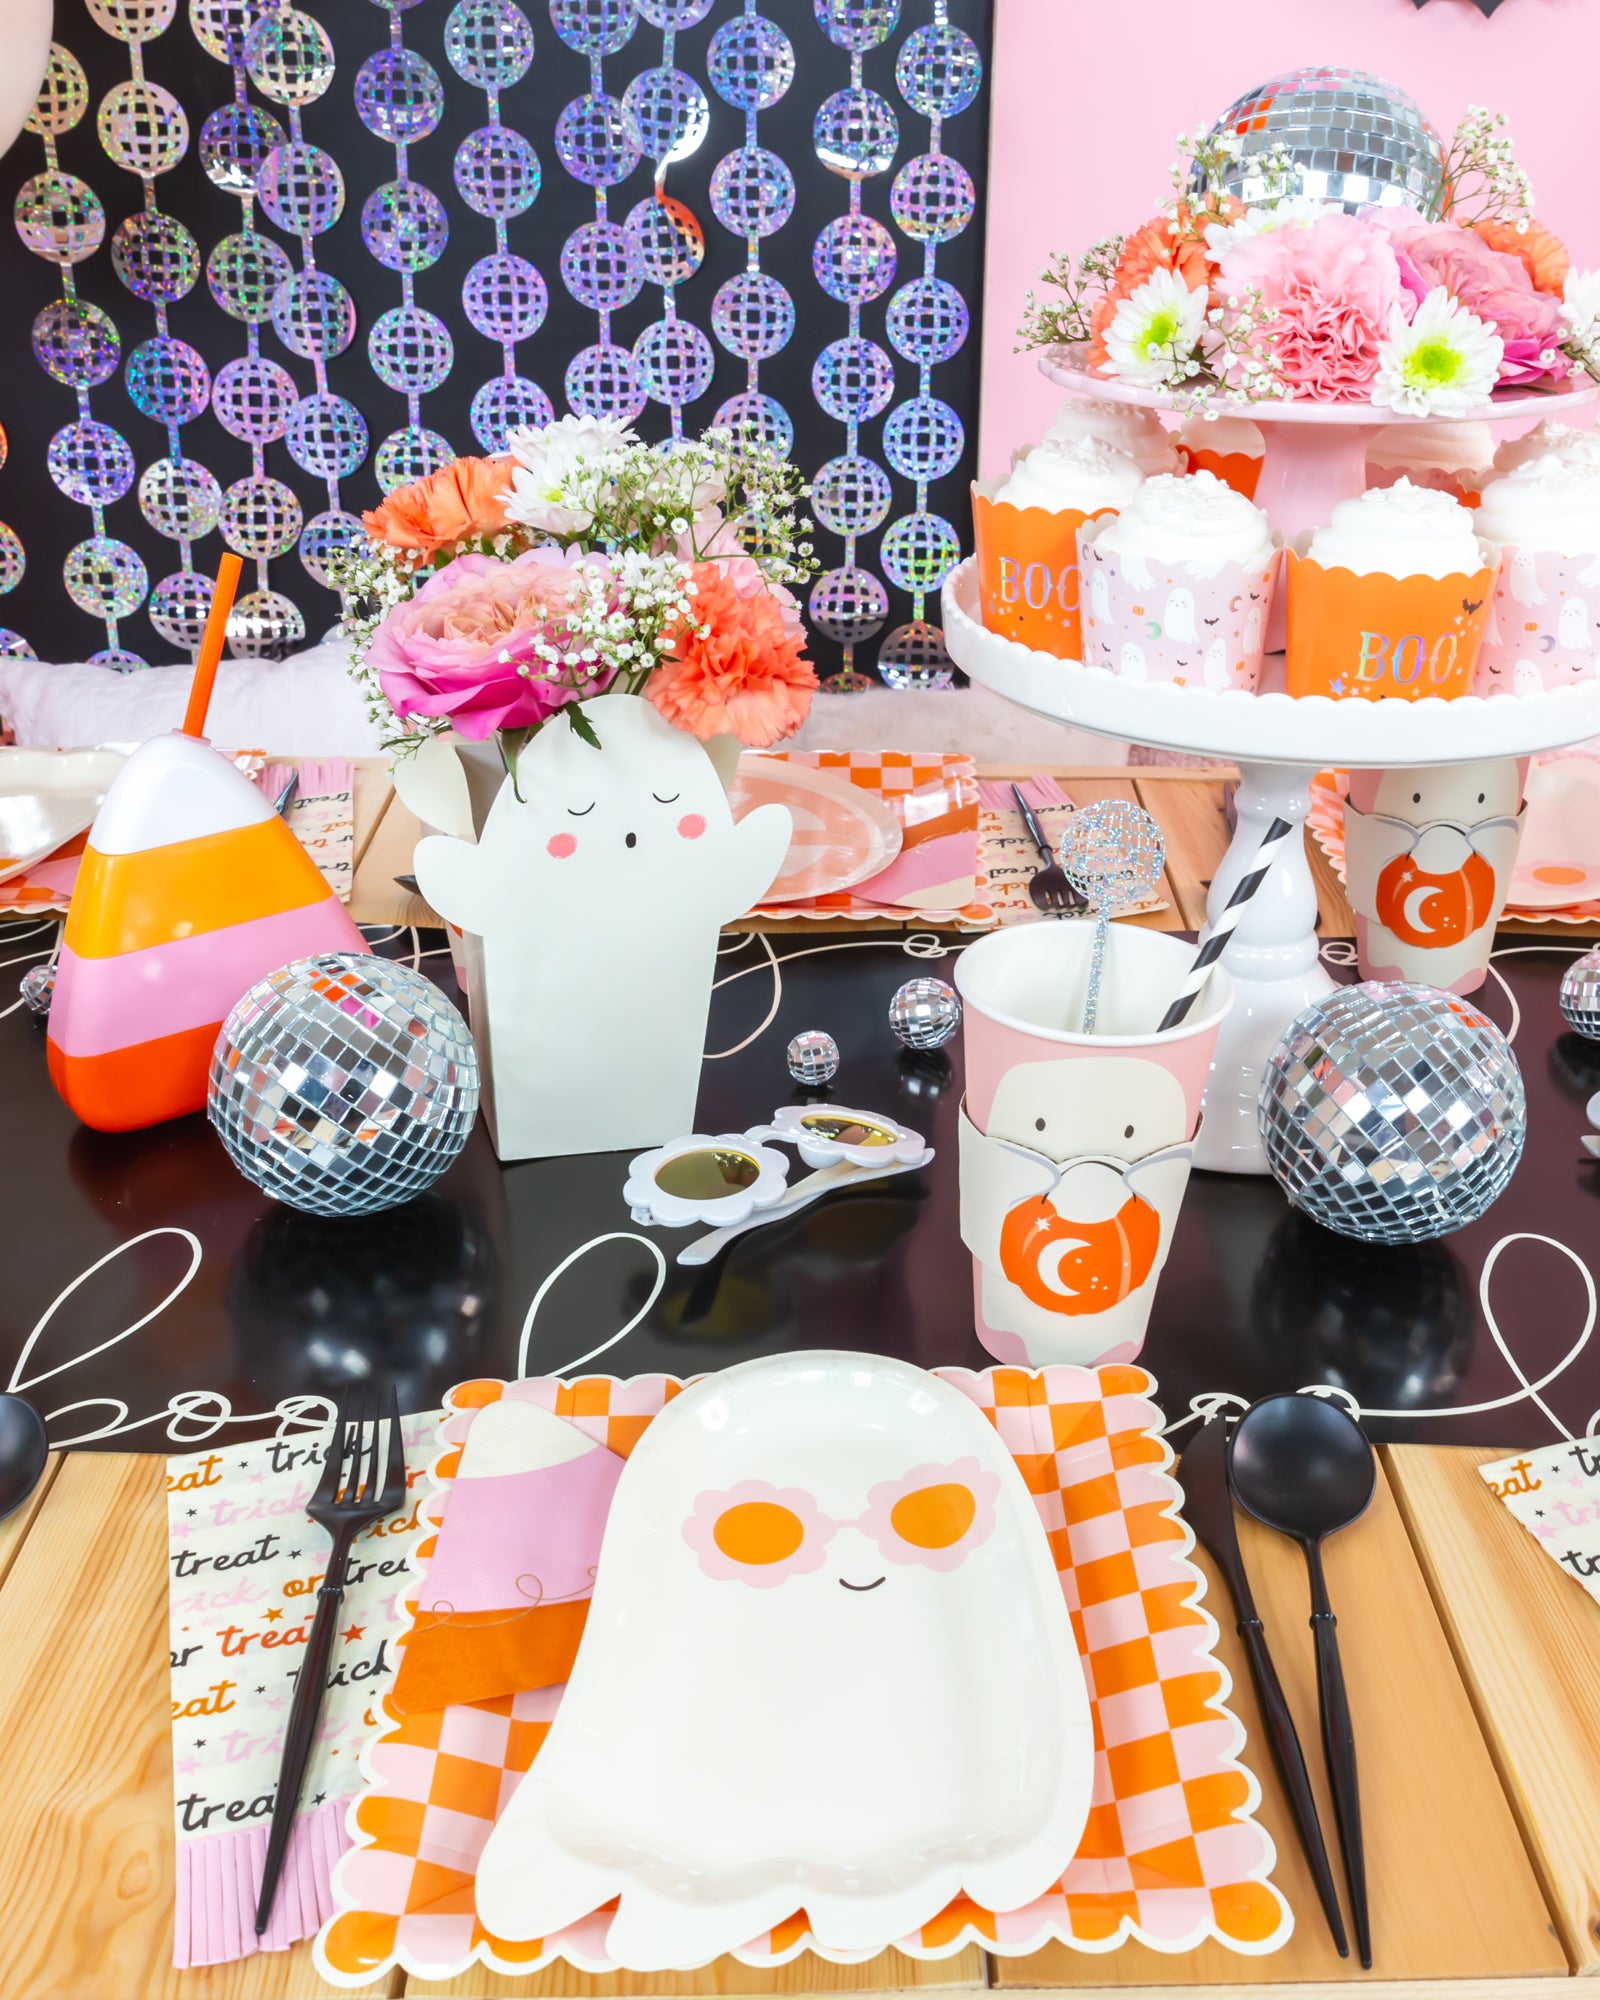 Candy Corn Dessert Napkins 18ct | The Party Darling